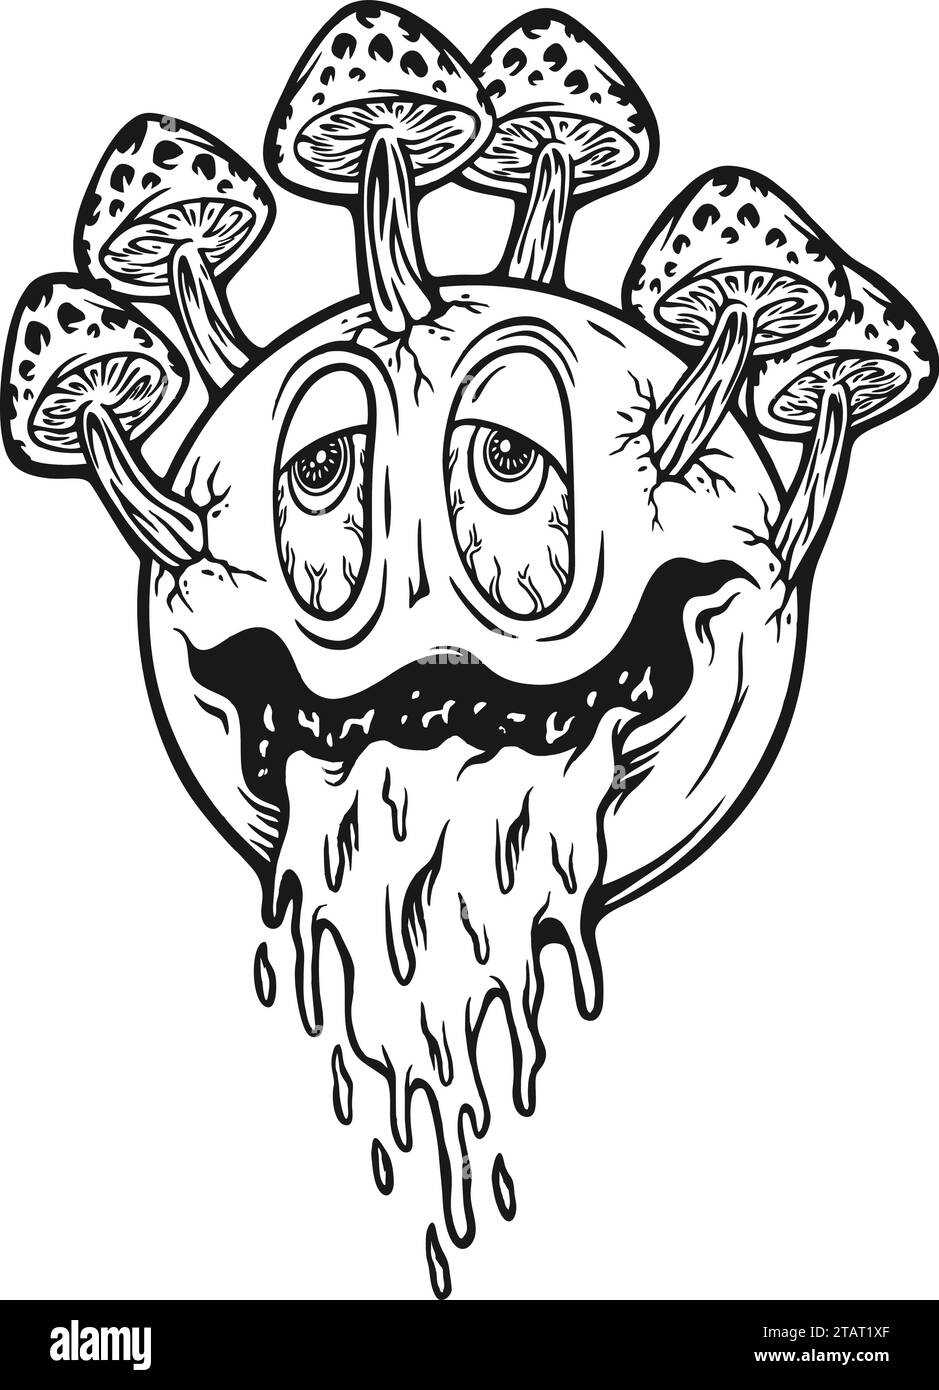 Psychedelic dripping magic mushroom emoticon monochrome vector illustrations for your work logo, merchandise t-shirt, stickers and label designs, post Stock Vector